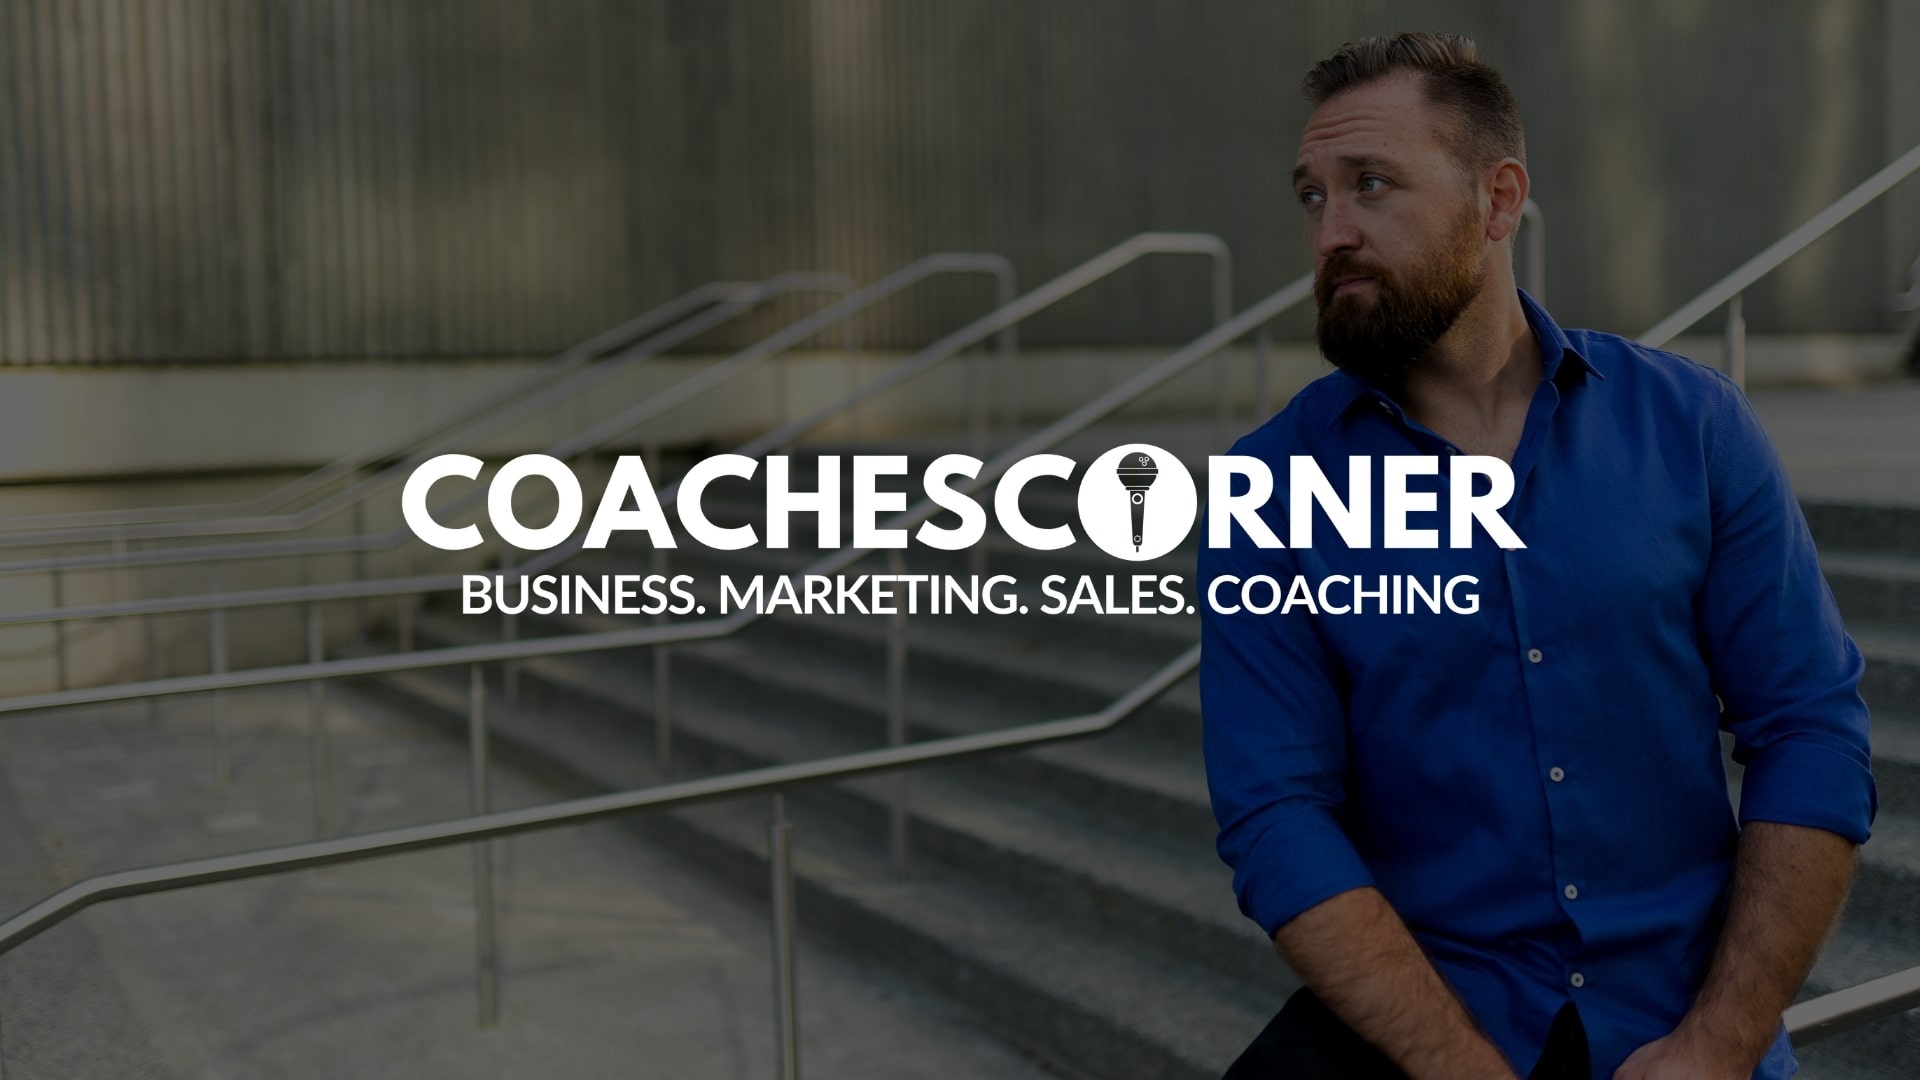 The Coaches Corner Podcast with Lucas Rubix - Build an online coaching business you love